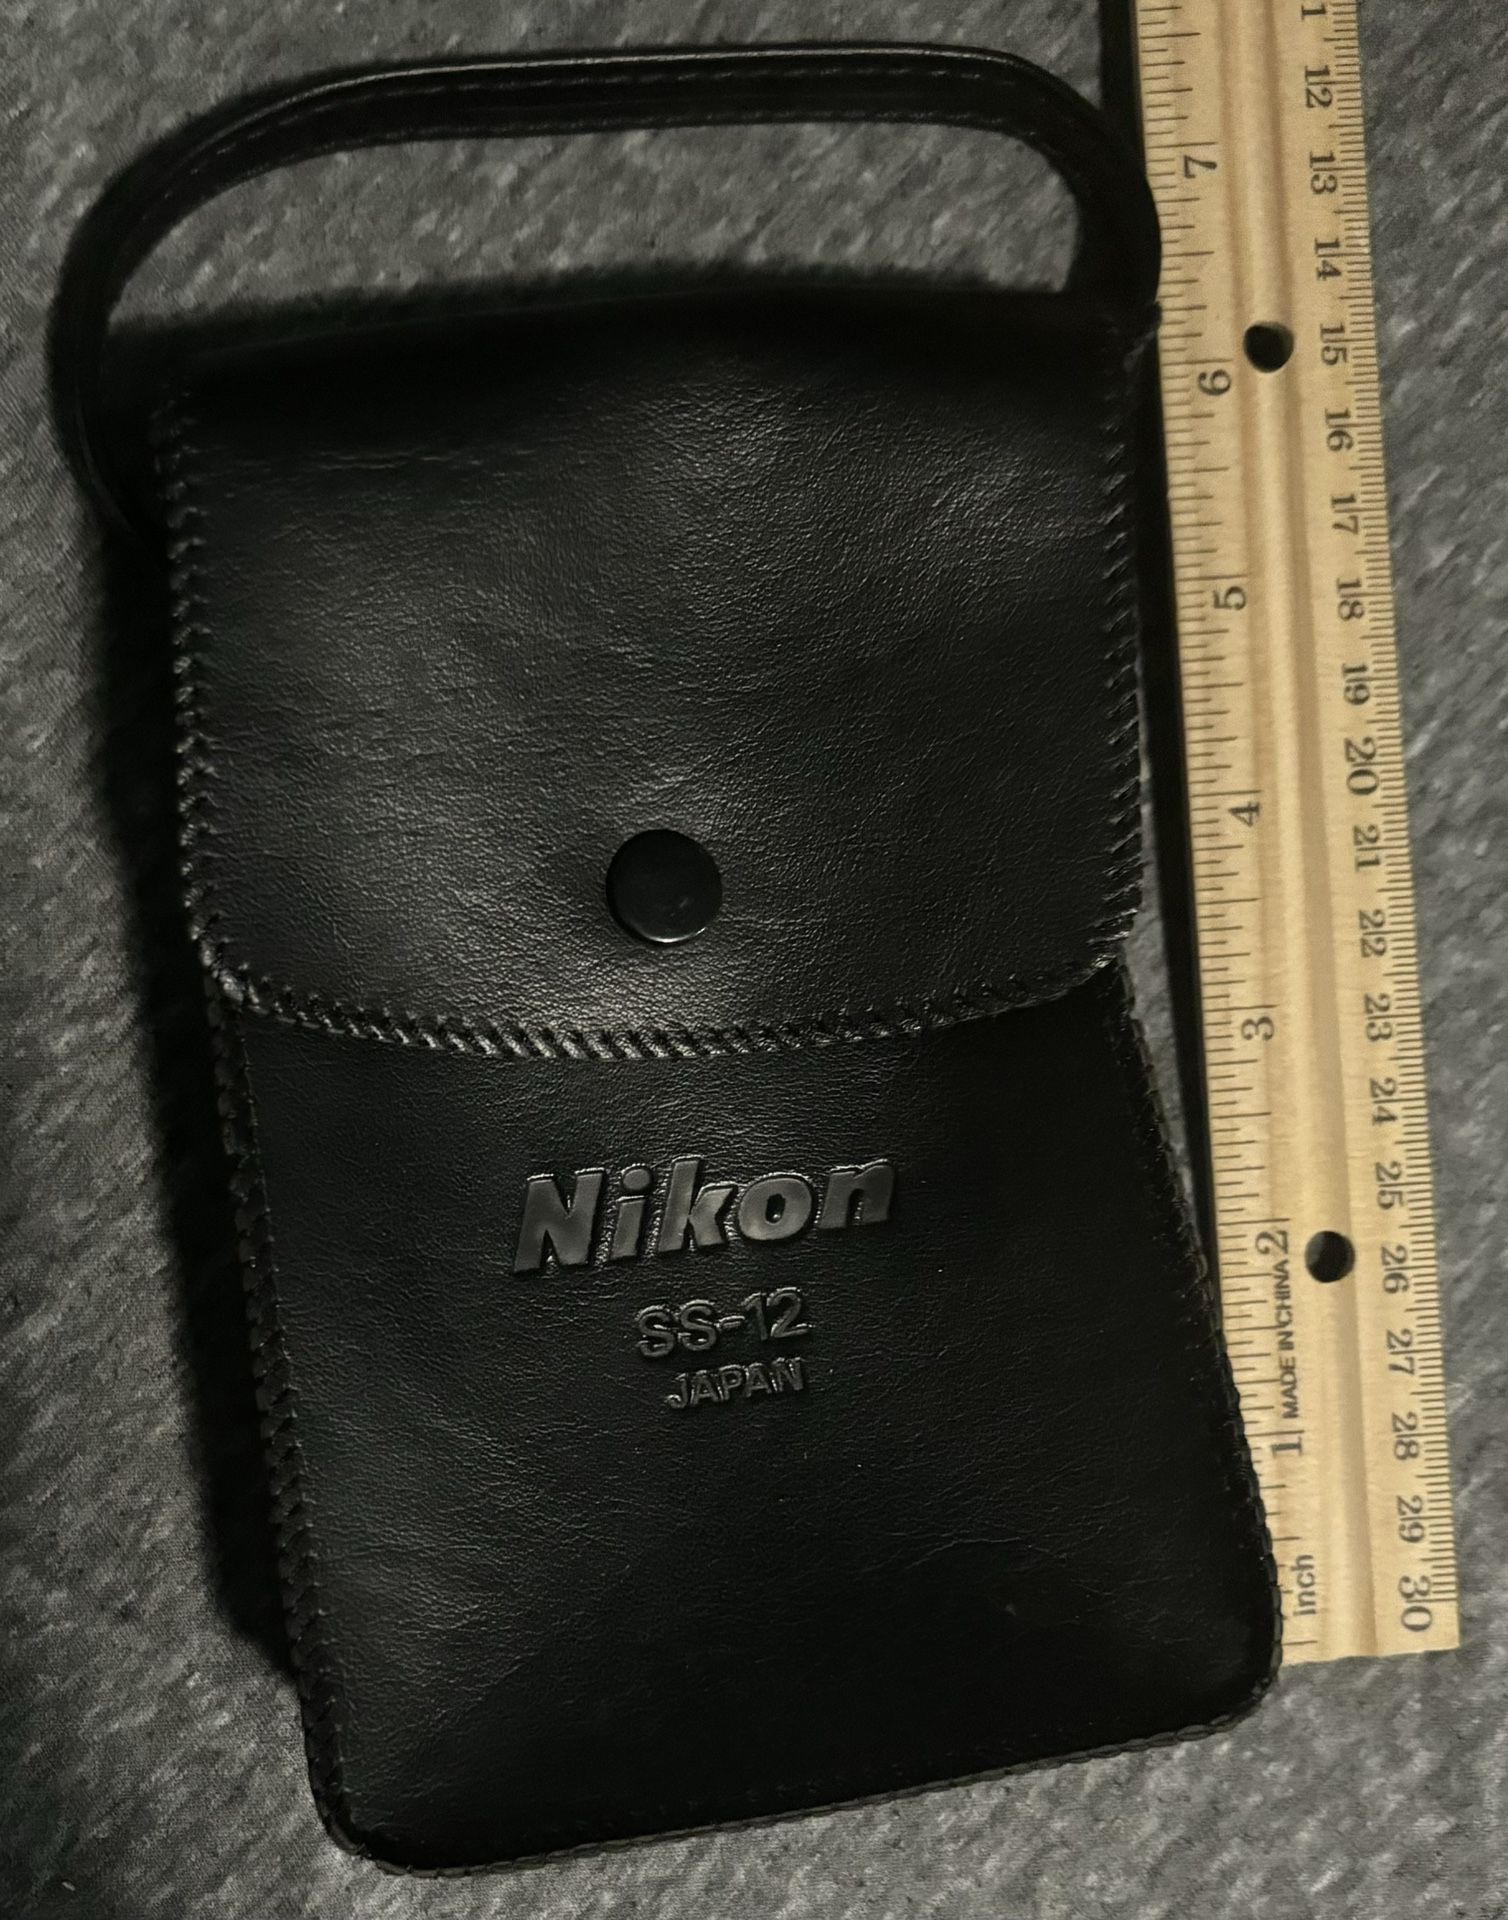 Nikon SS-12 black leather camera case with handle